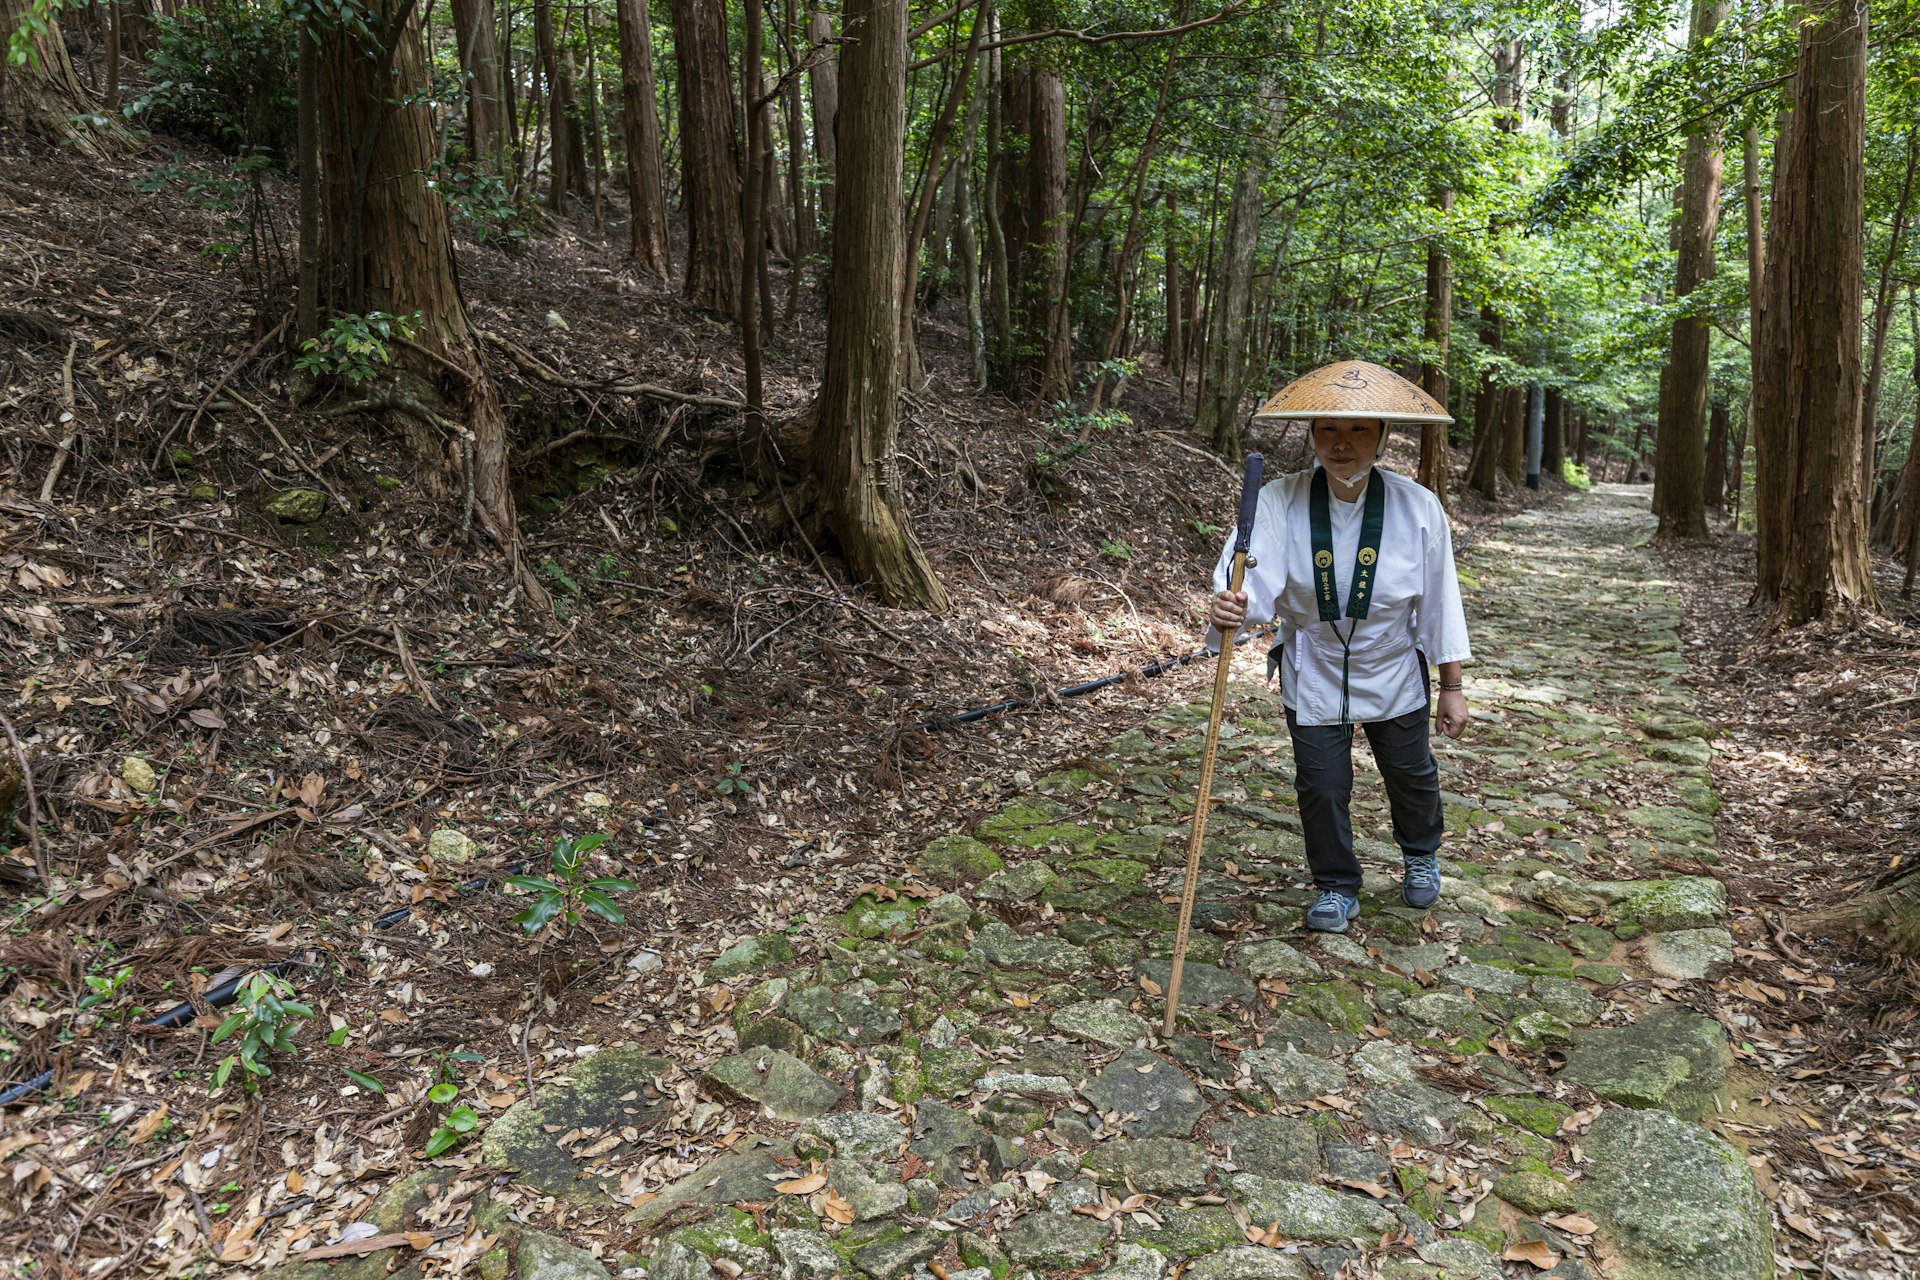 A woman wearing a traditional Japanese bamboo hat walks on a stone pathway covered in grass uphill as part of the 88 Sacred Temples of Shikoku Pilgrimage.  